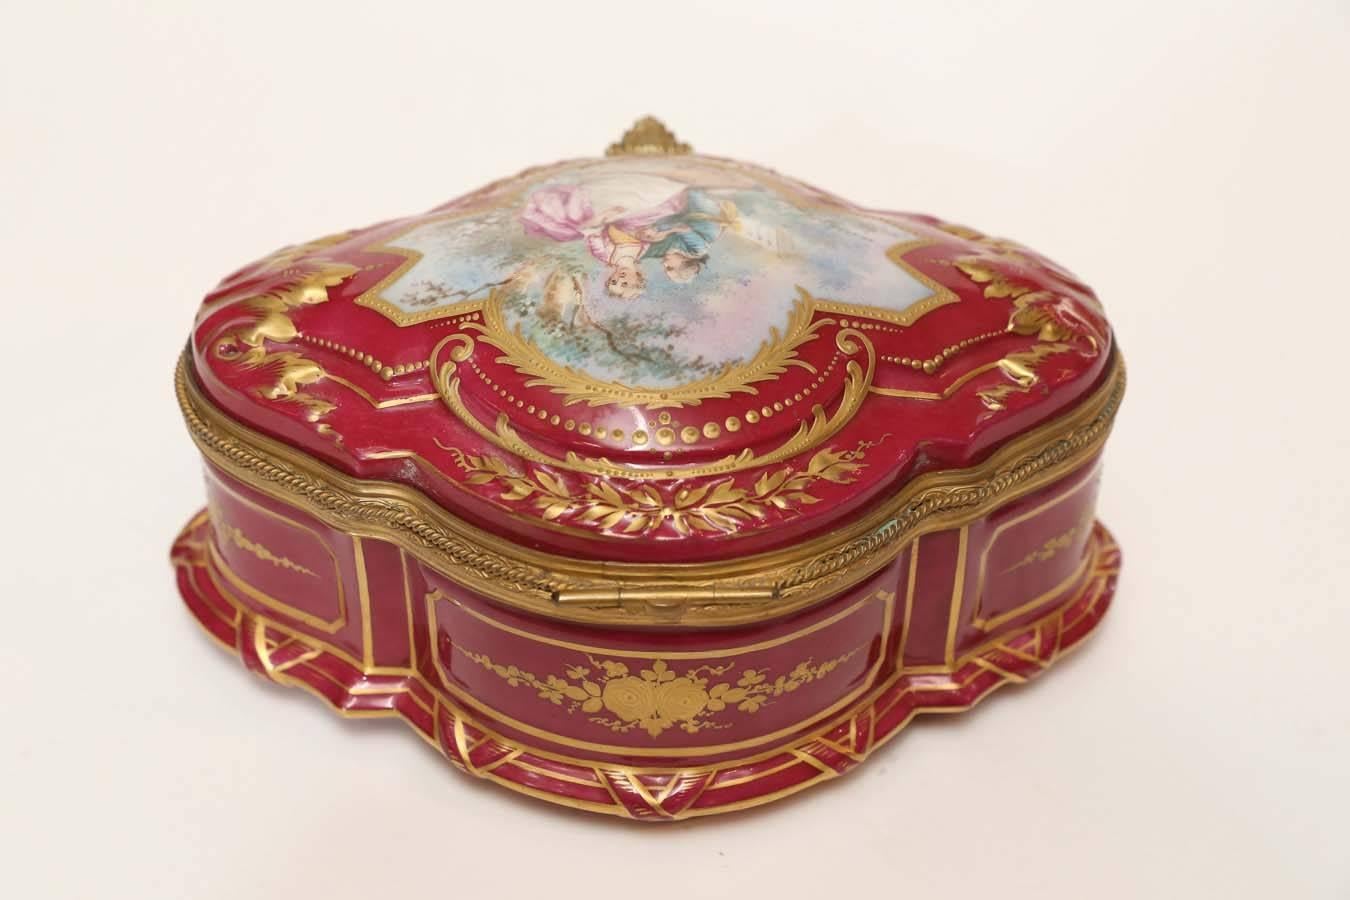 French Sevres Porcelain Box with Gilt Trim